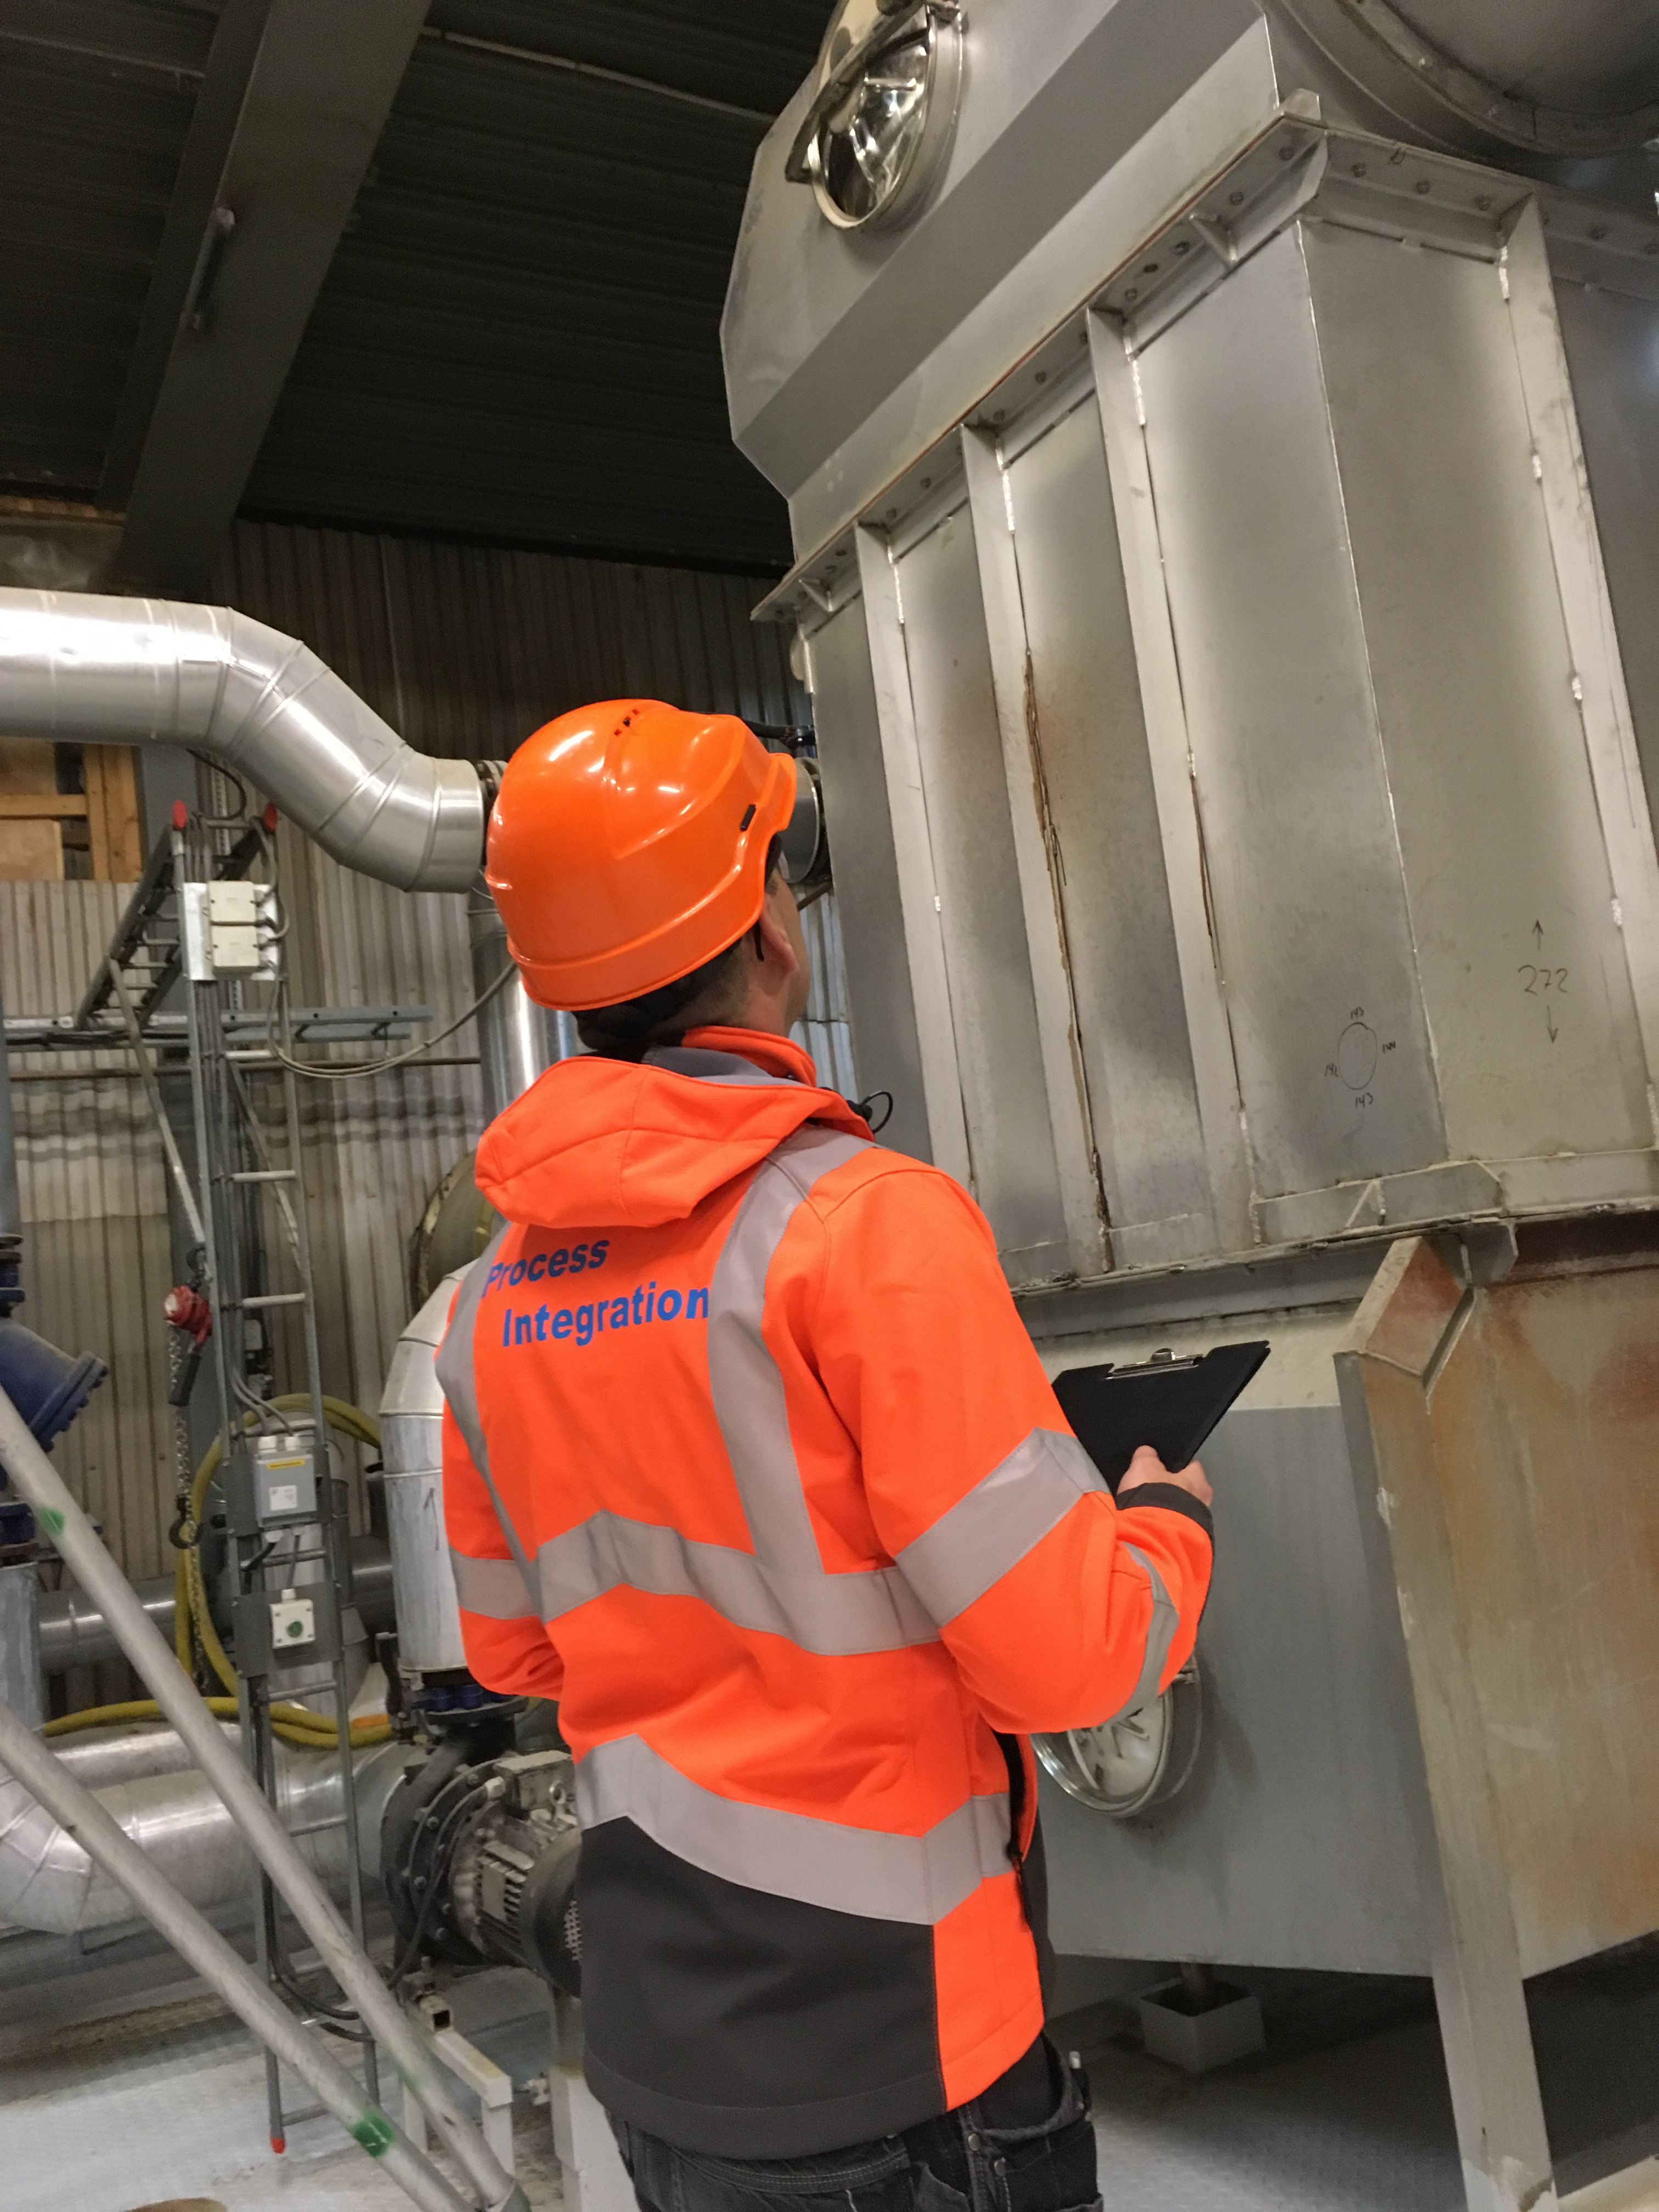 Service inspection on site can prevent unplanned stoppages